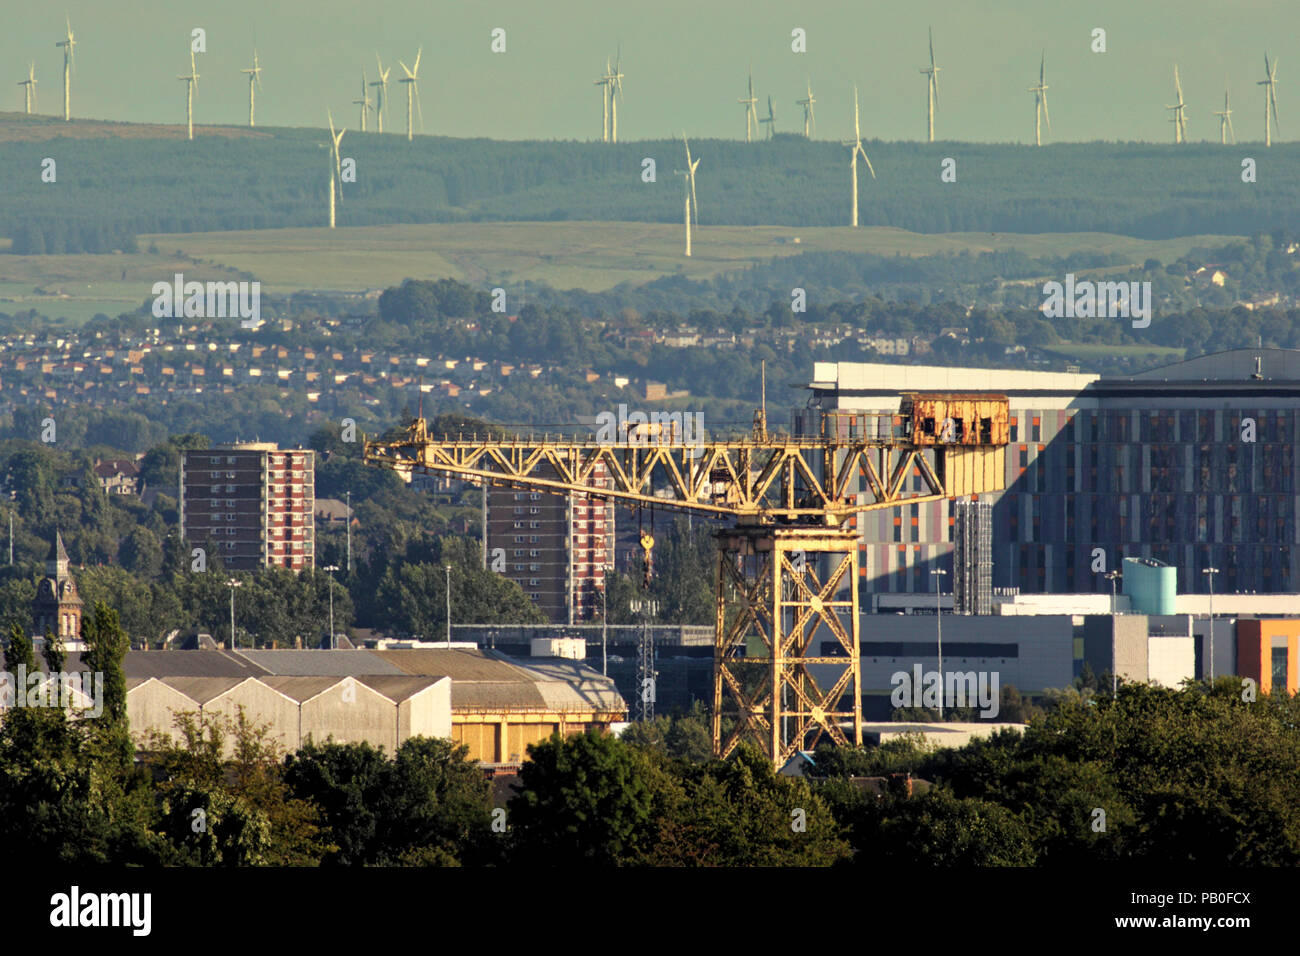 old clyde titan crane  The Barclay Curle Crane near Govan with the modern wind turbines of Whitelee Wind Farm 8 miles away contrasting the old new Stock Photo